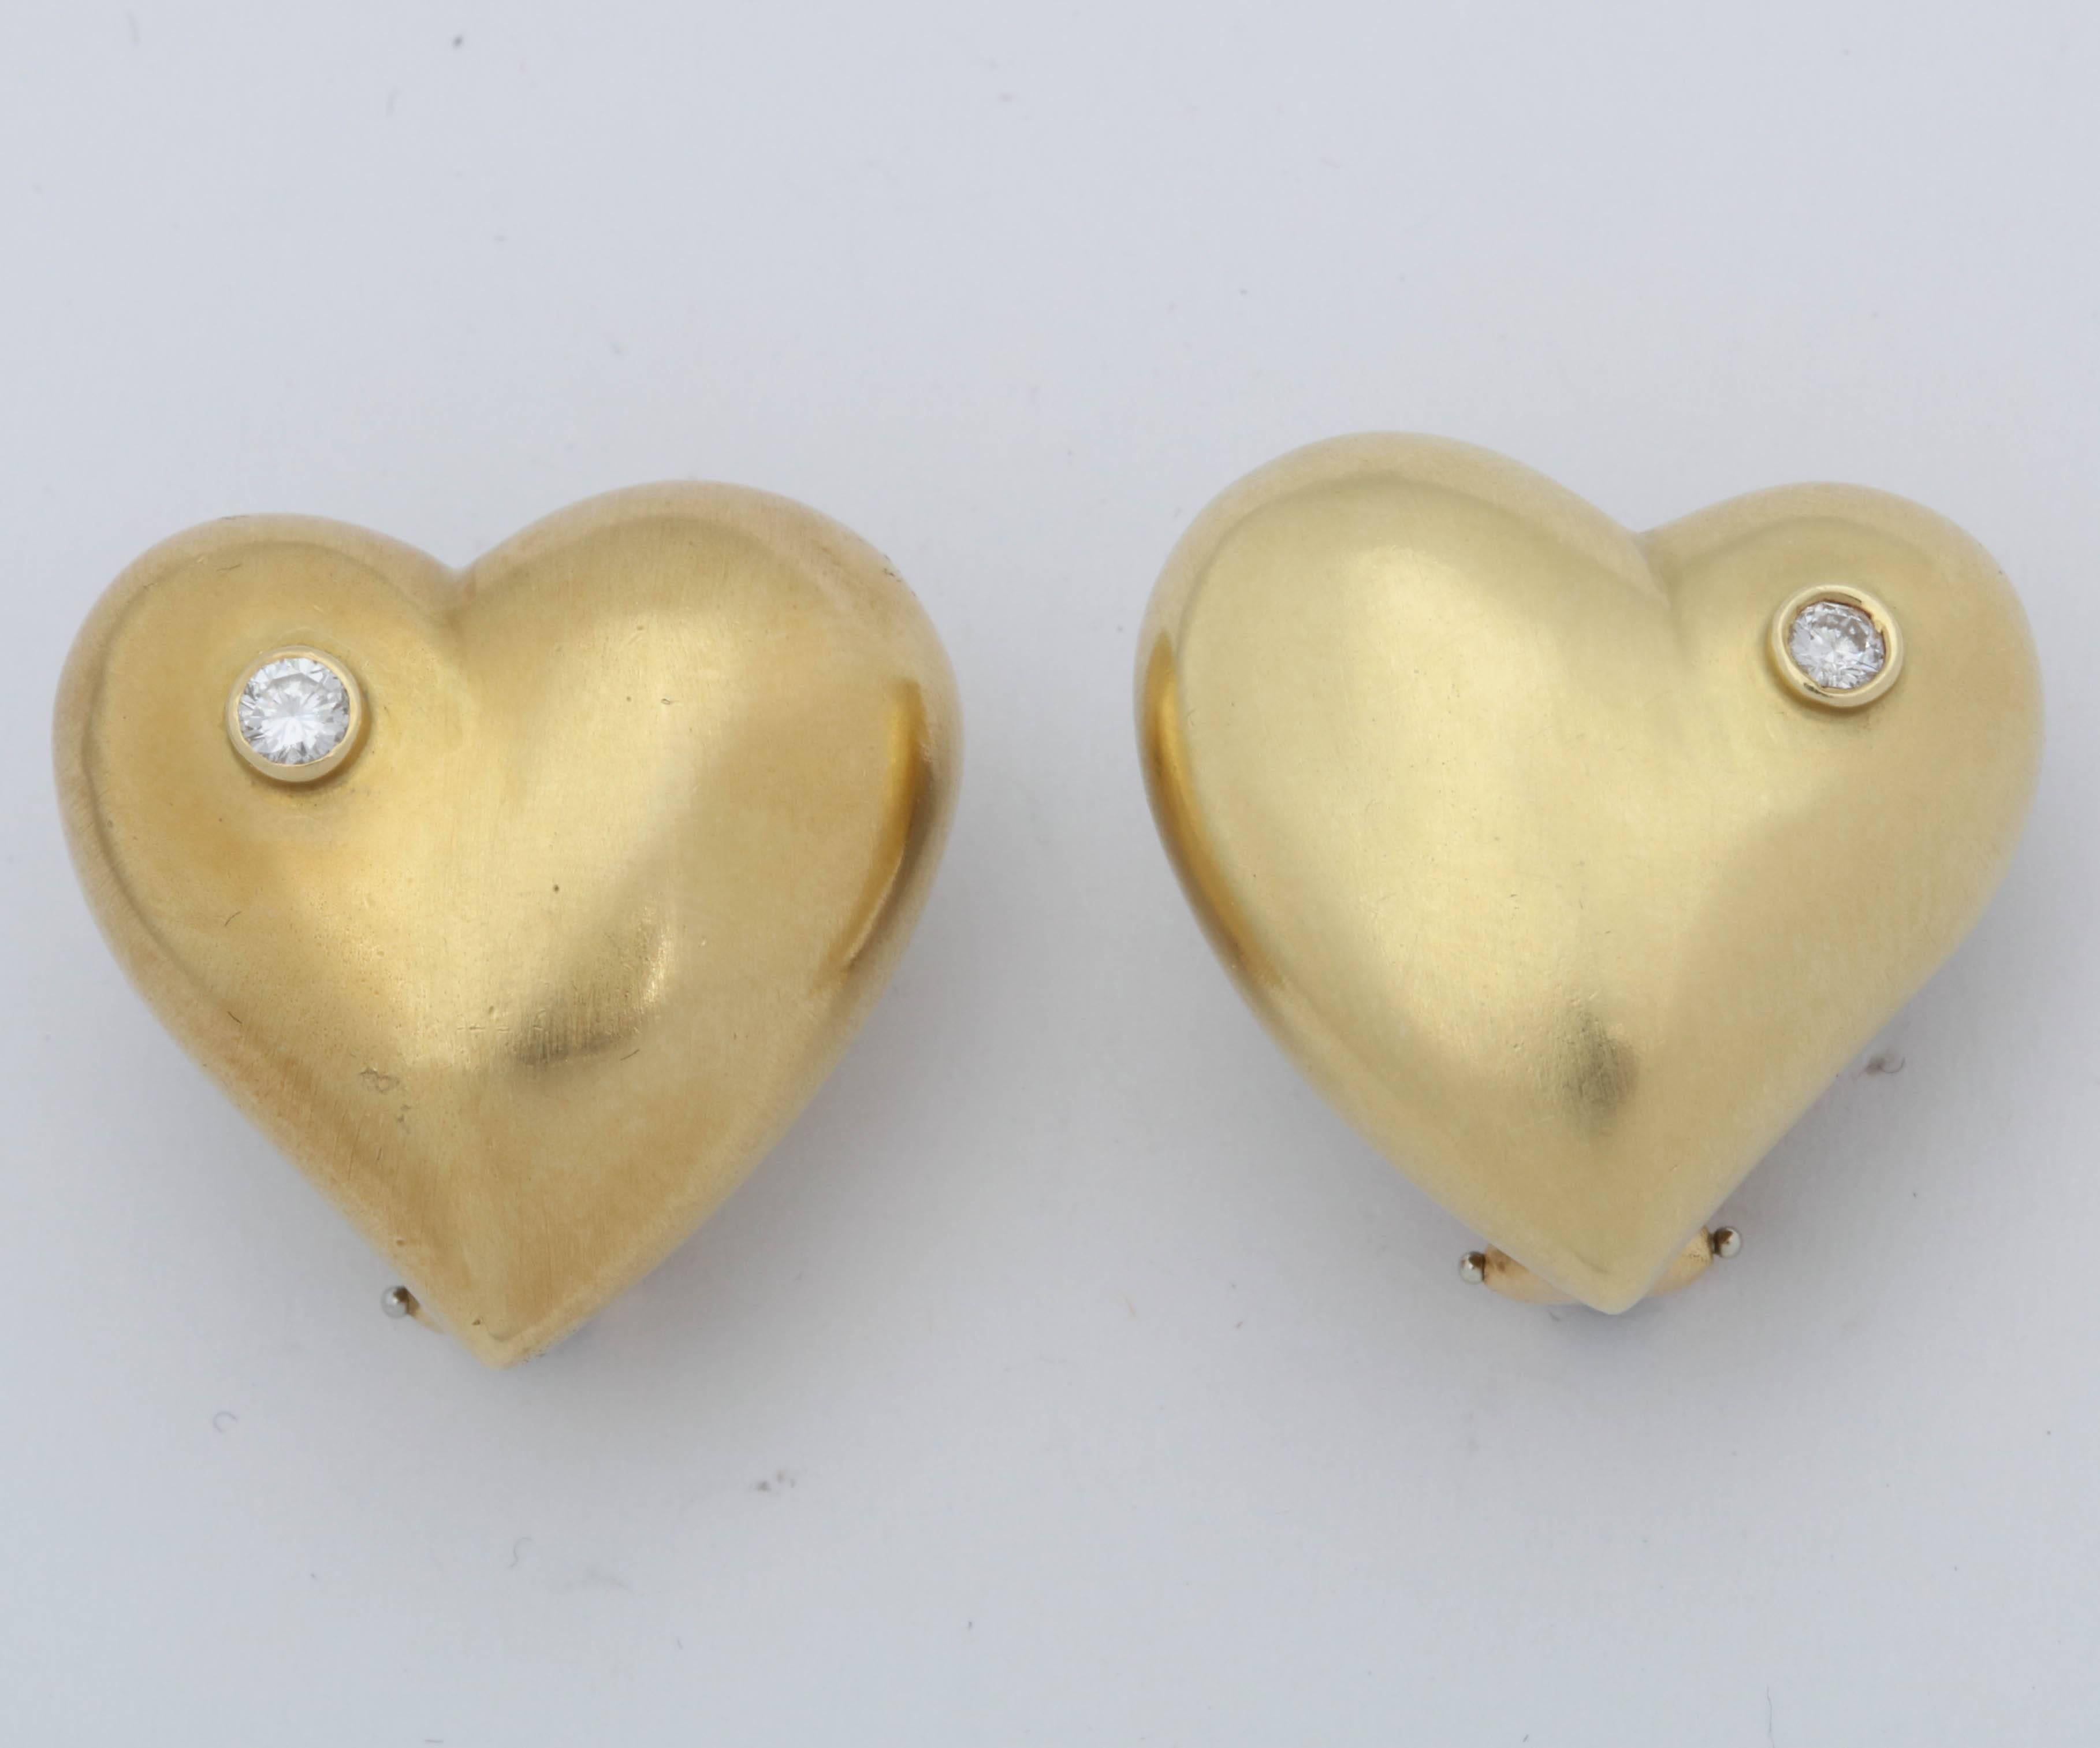 One Pair Of Ladies 18kt Yellow Gold hand Hammered Puffy Heart Earrings Created With Two Bezel Set .5 Ct Full Cut diamonds In the Corner Of the Hearts. Note Earrings May Be Worn With diamonds Facing Your face Or worn with diamonds Facing The opposite